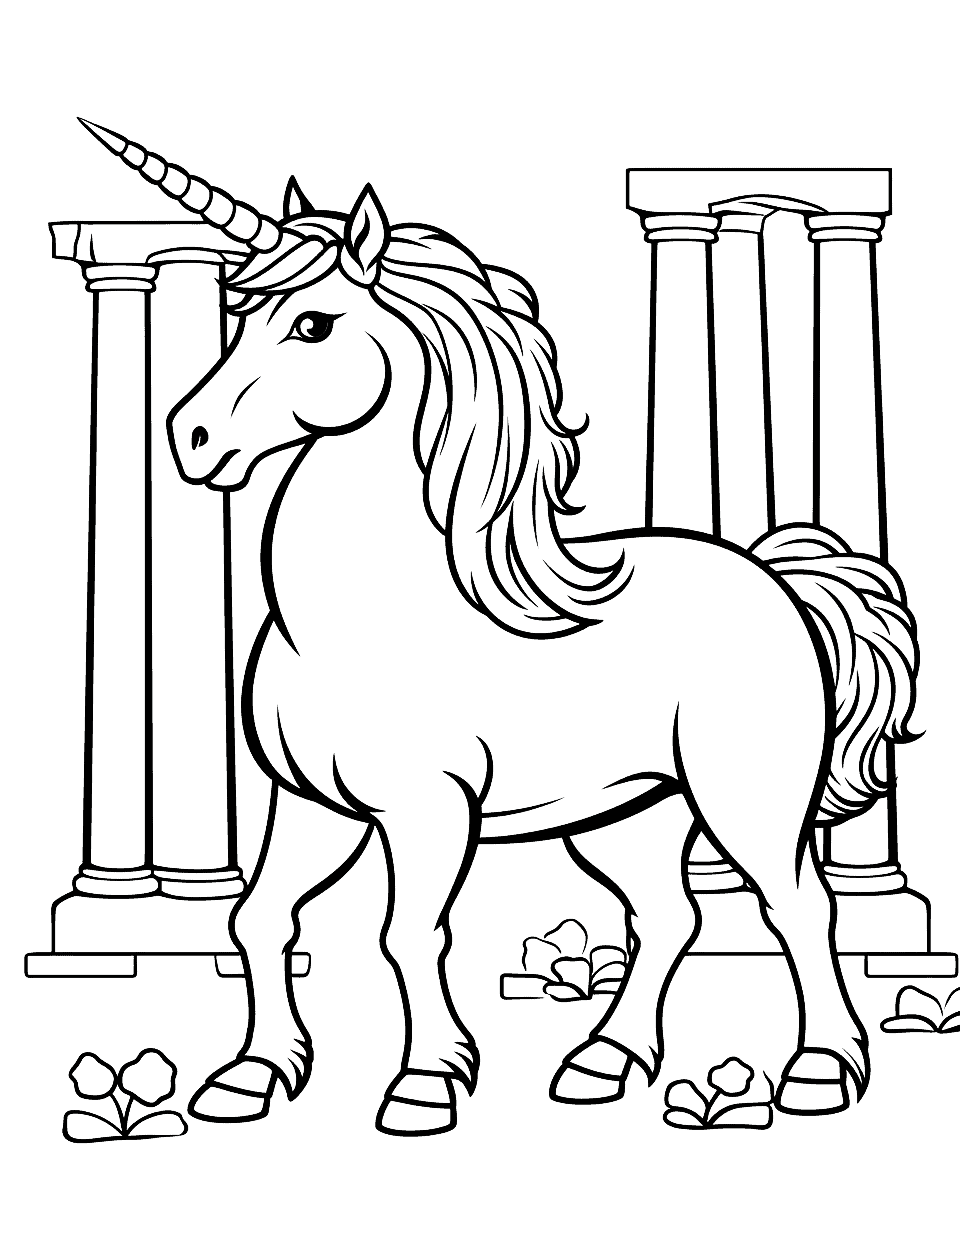 Unicorn and Roman Architecture Coloring Page - A unicorn in front of a Roman column.